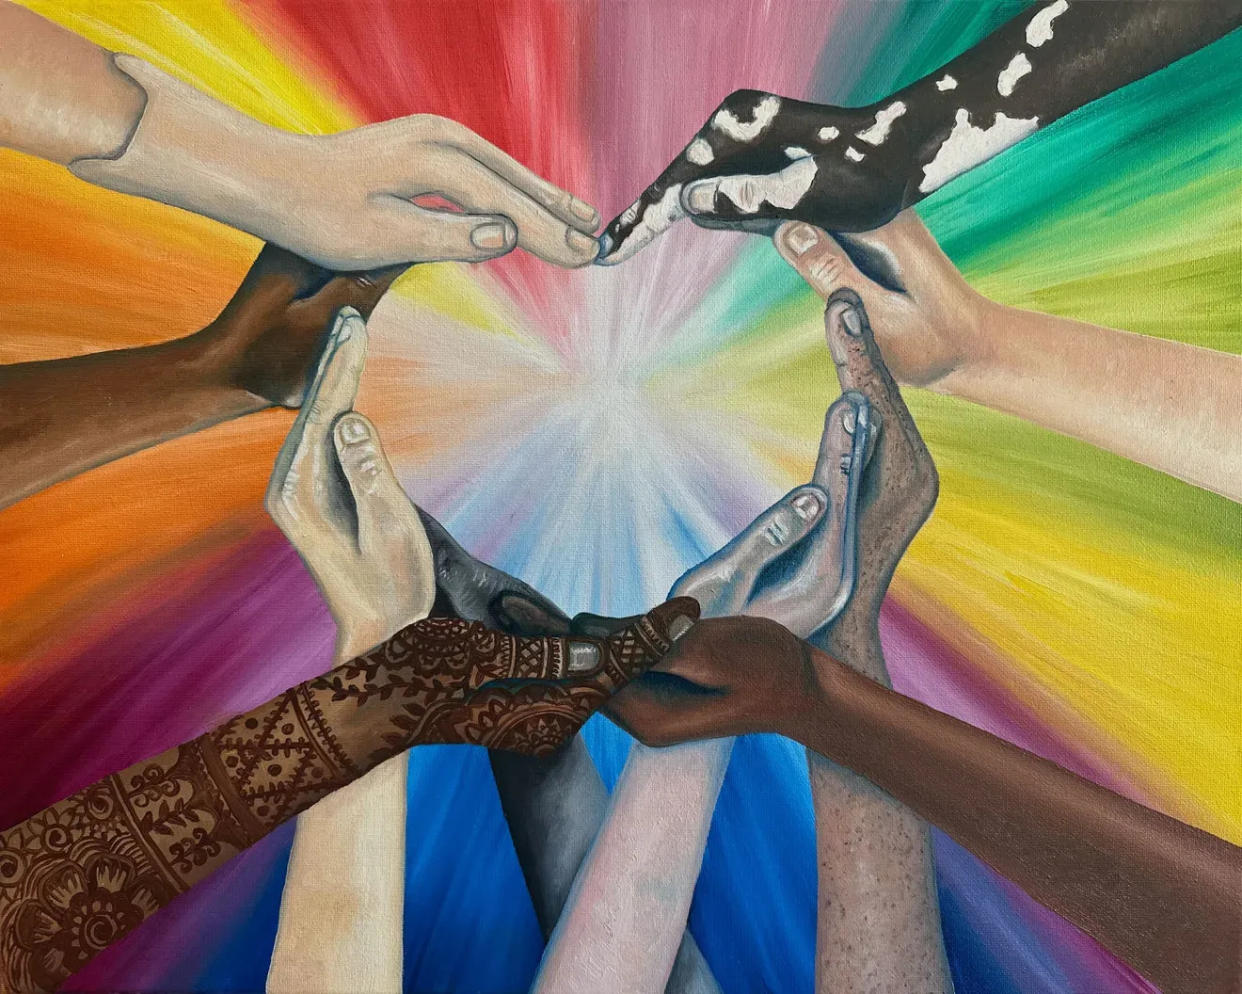 This artwork, Hand'le with Care by Samantha Dennis, of Woodbridge, Canada, won Best-in-Show Adult in the Embracing Our Differences 2024 exhibit.